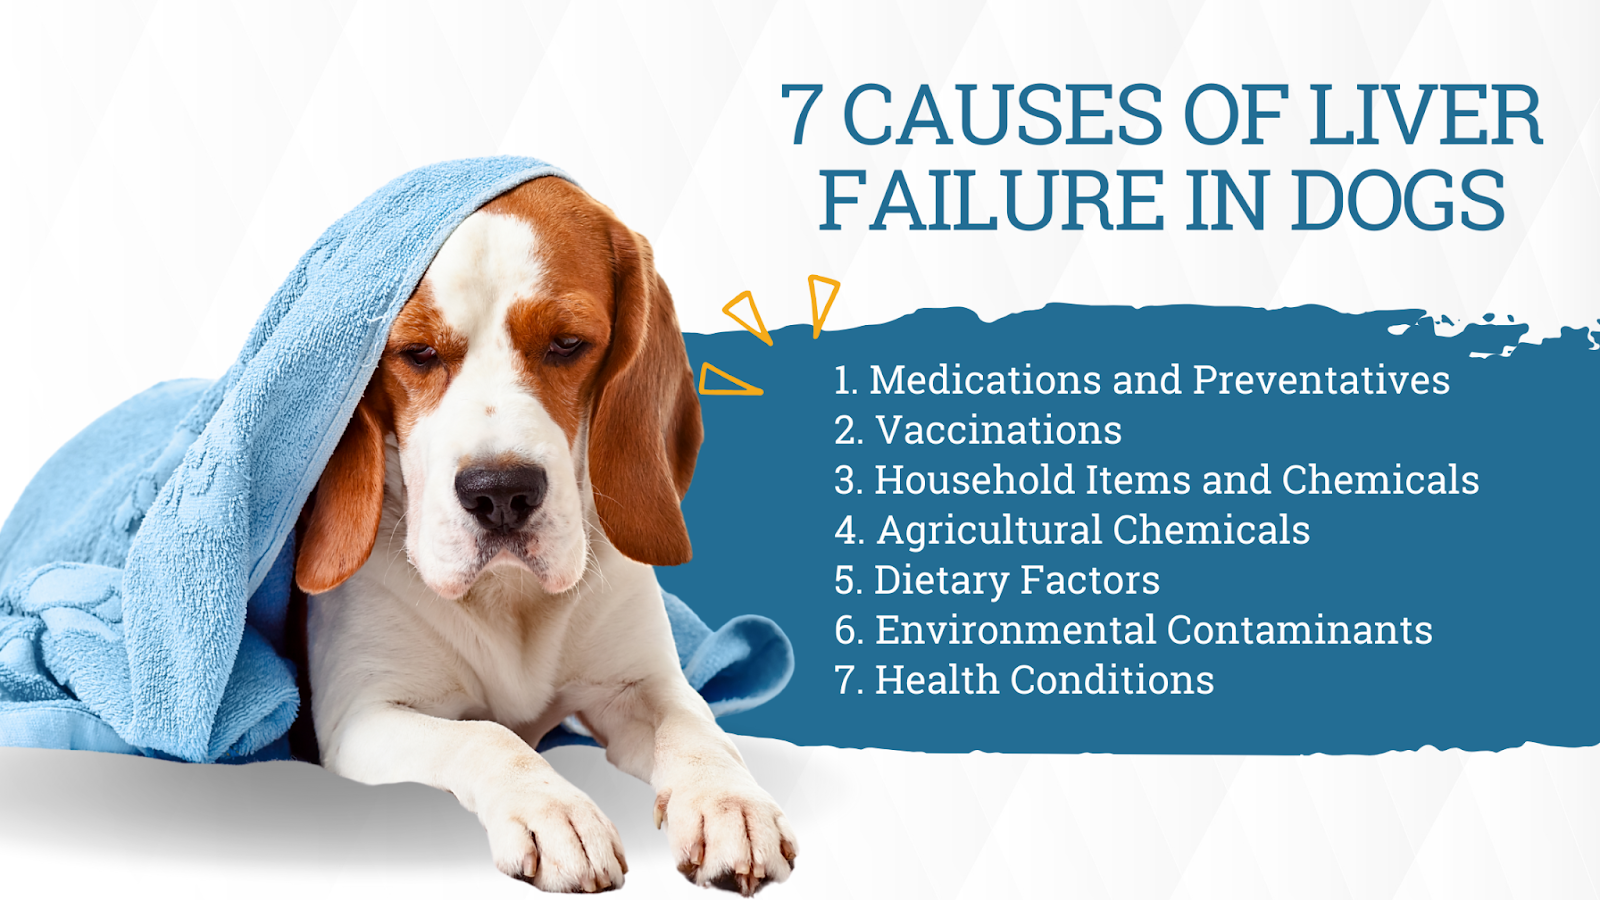 Causes of liver failure in dogs